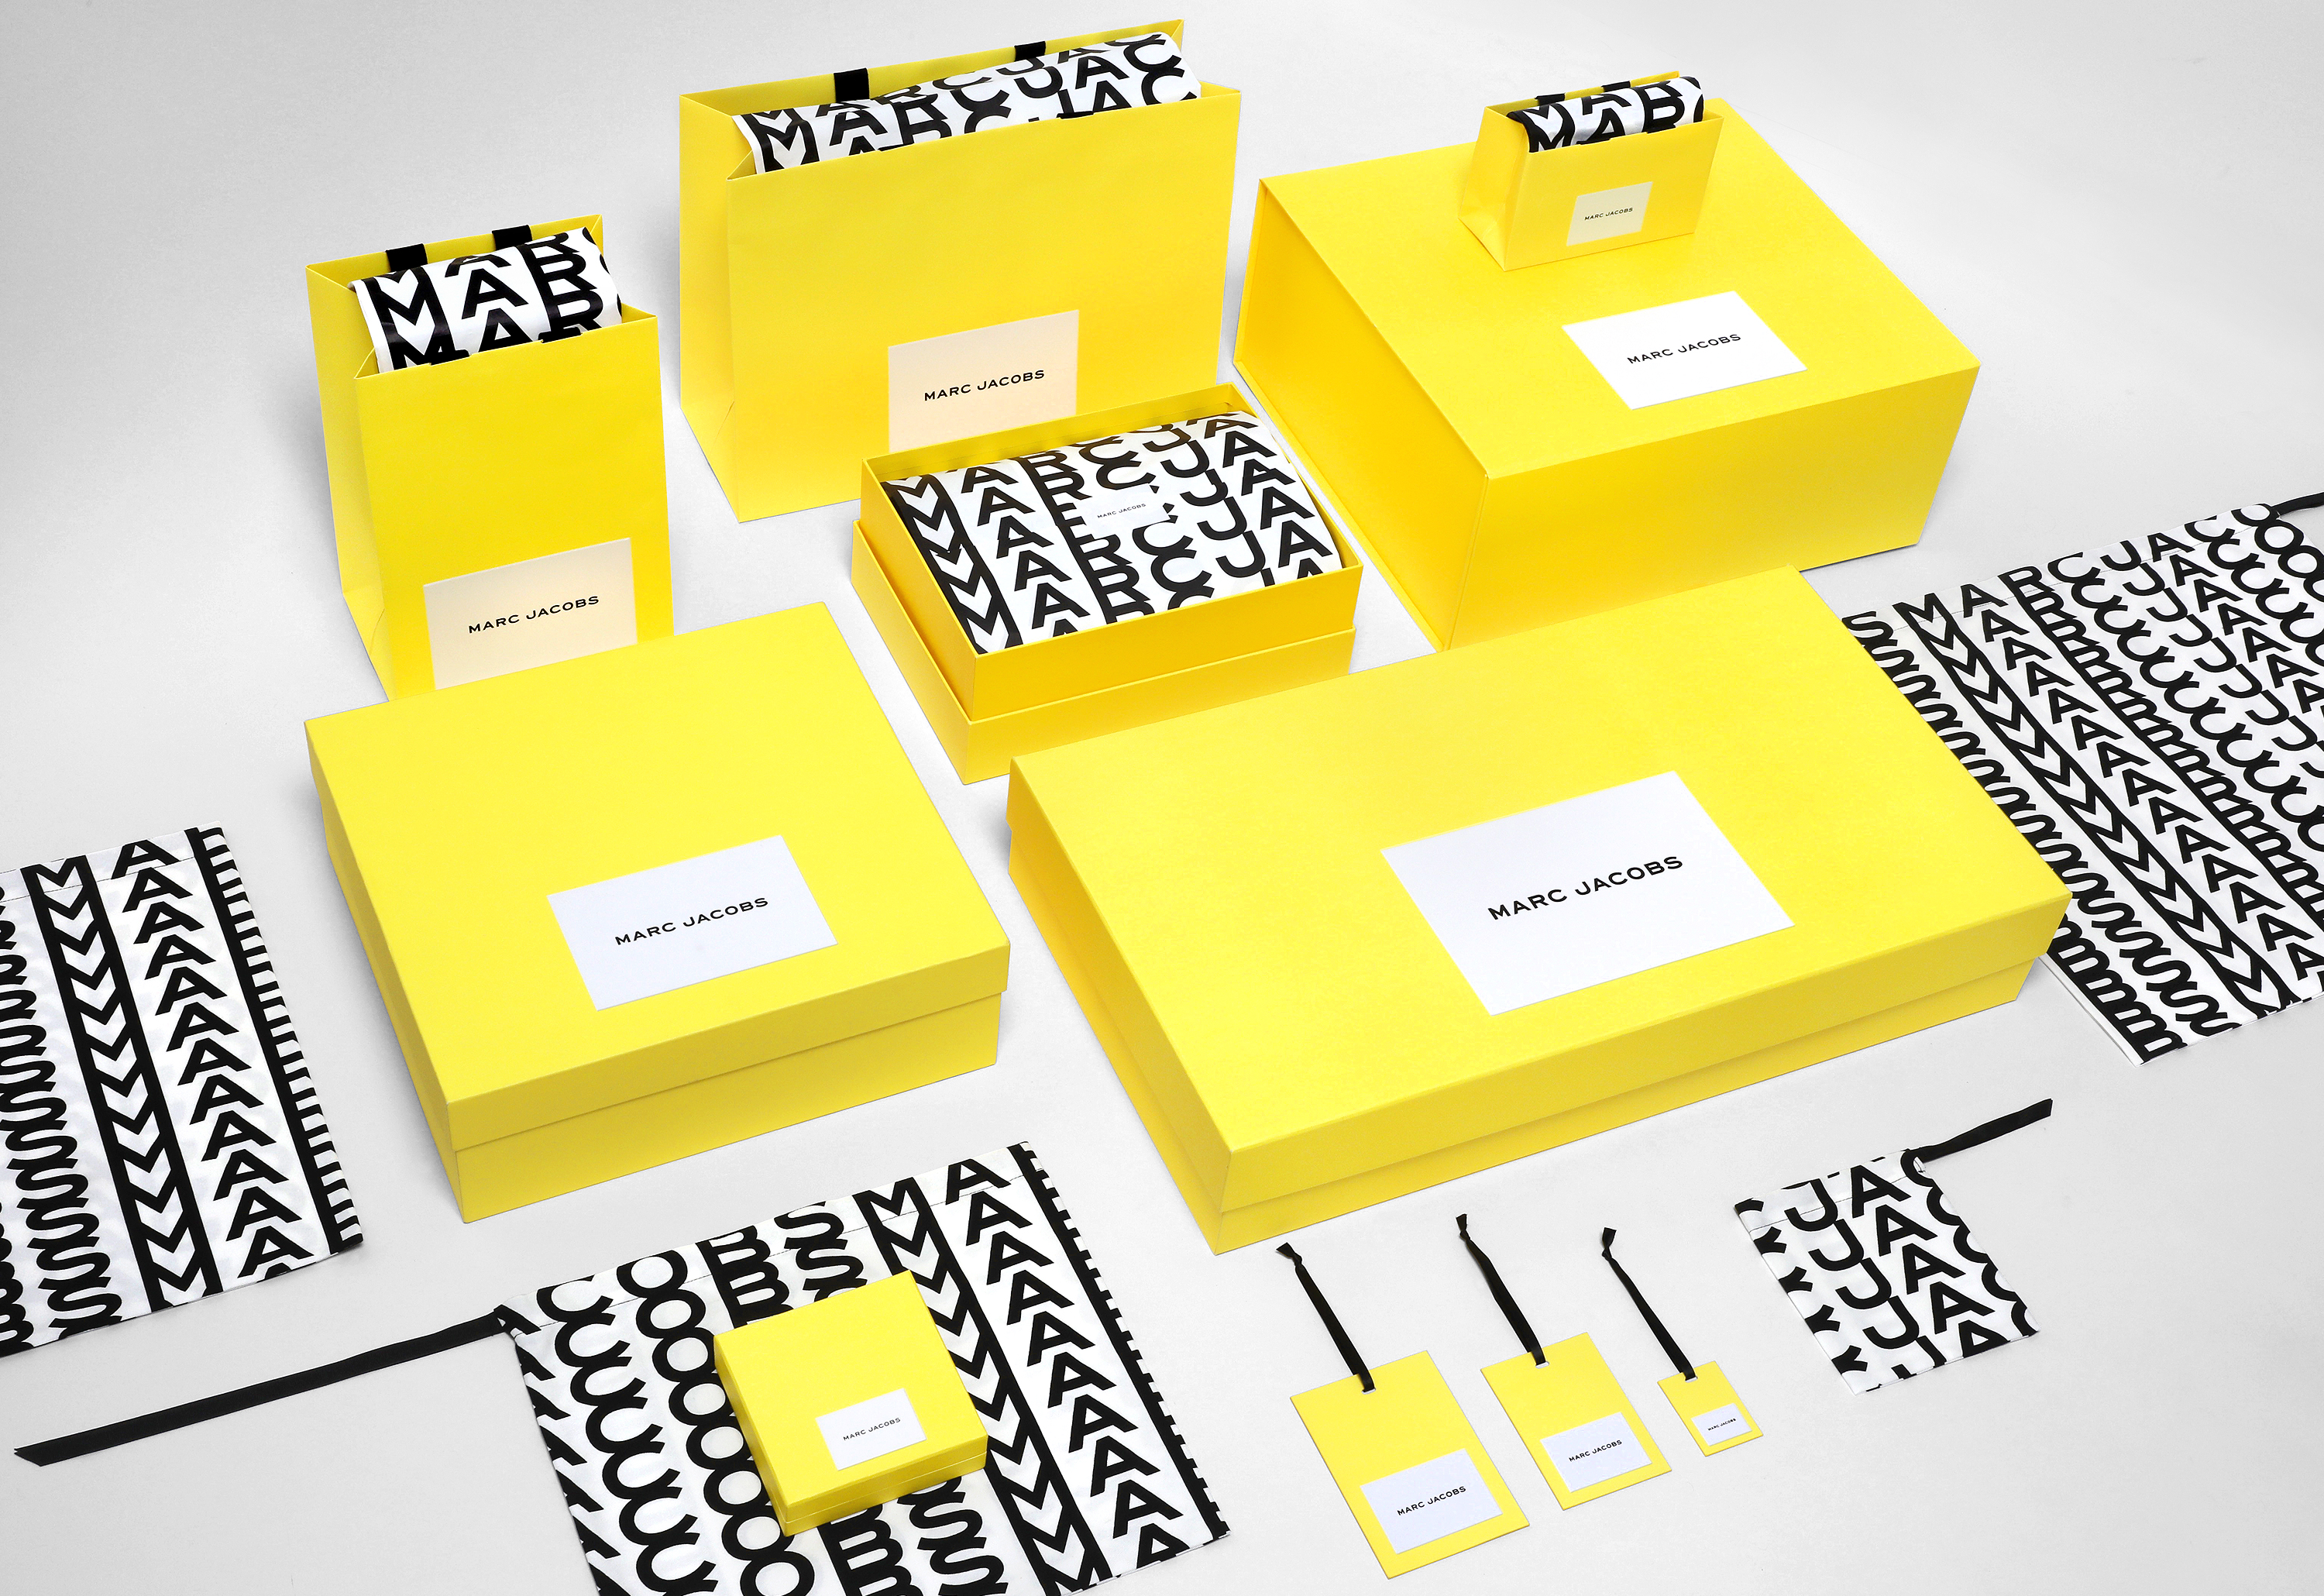 New brand identity and packaging for Marc Jacobs by New York design studio Triboro